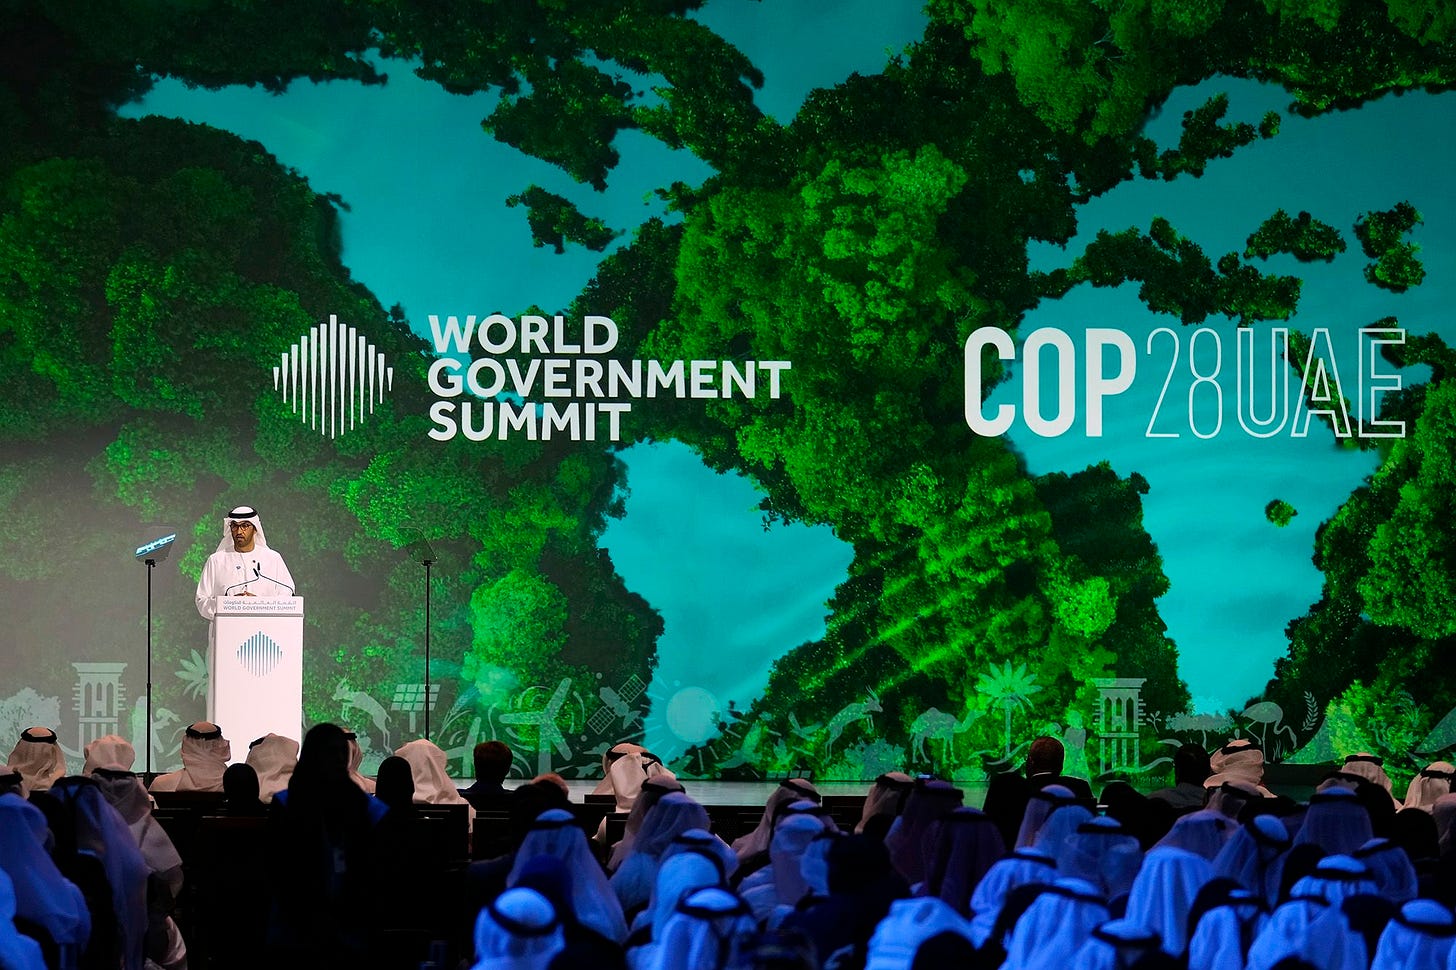 COP28 in Dubai: Inside the push to greenwash the next climate summit | CNN